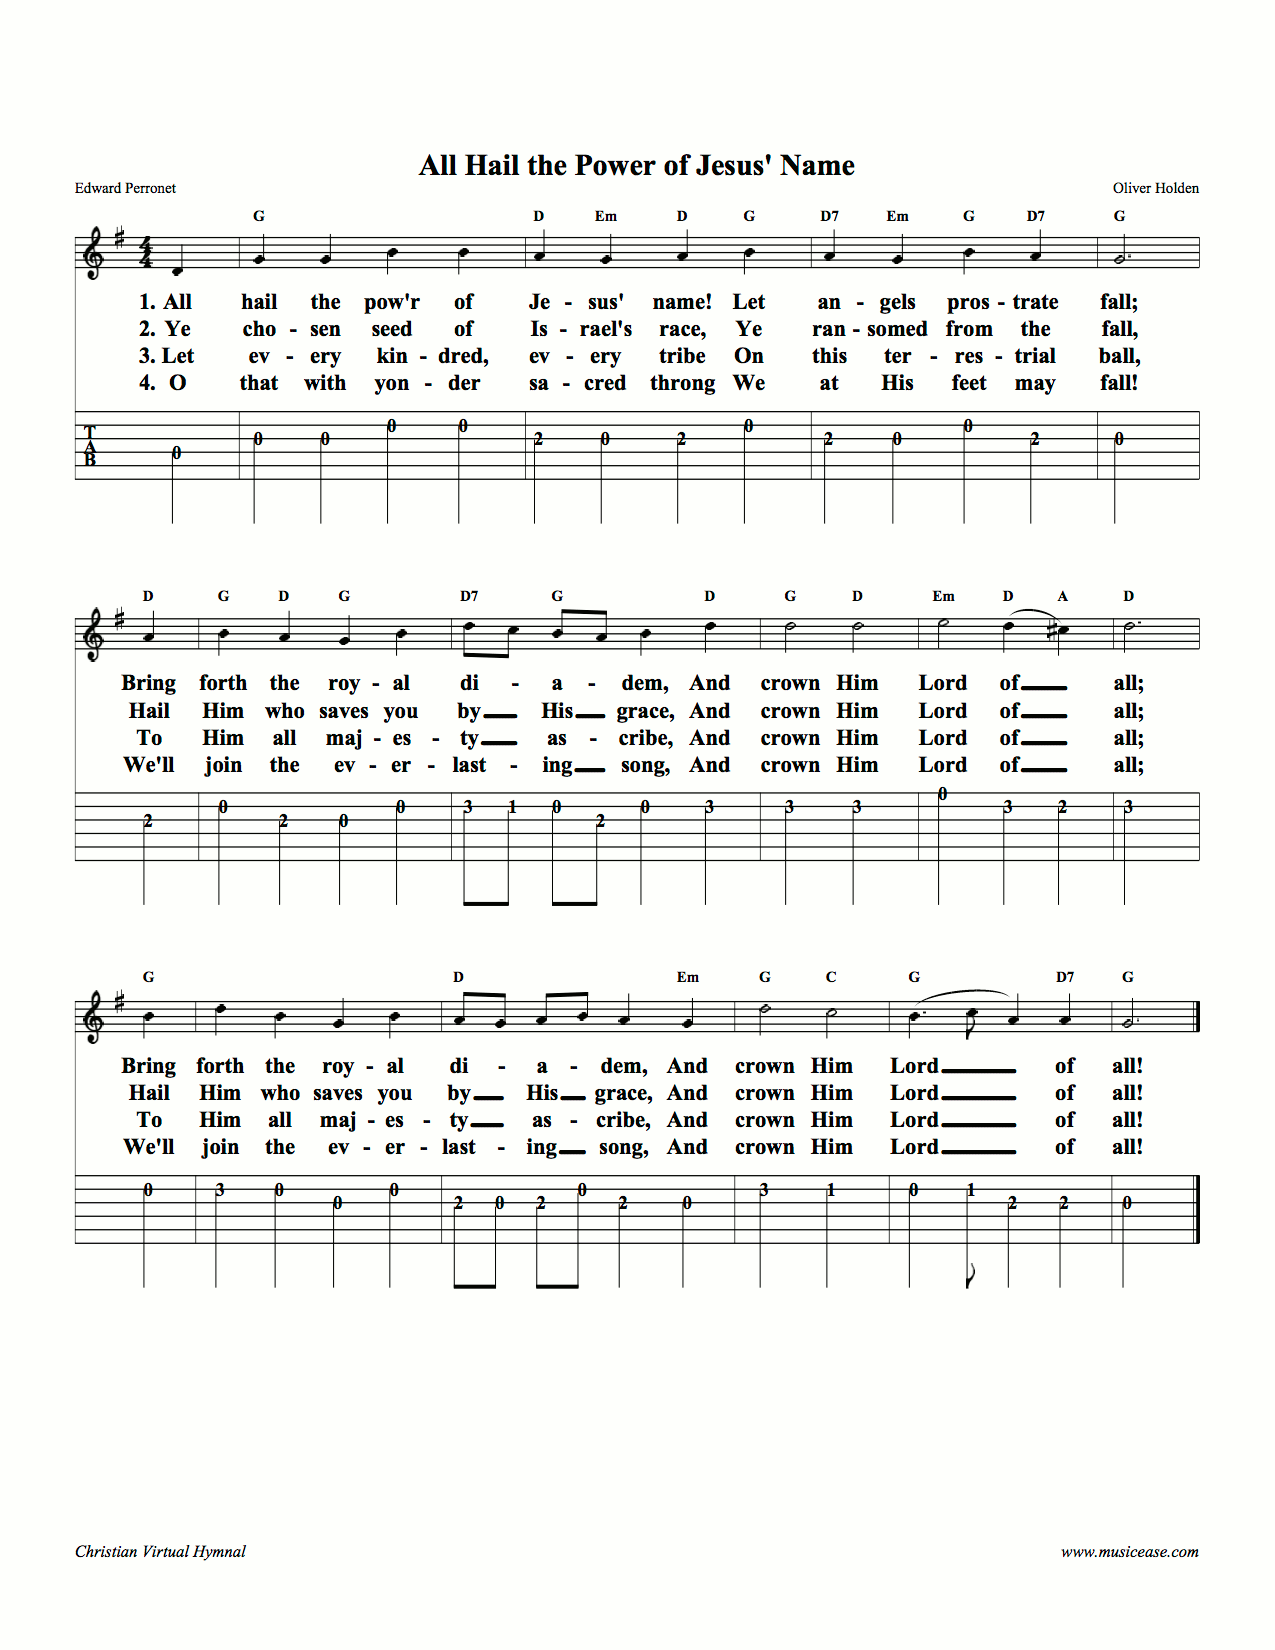 Lead Sheet with Tablature